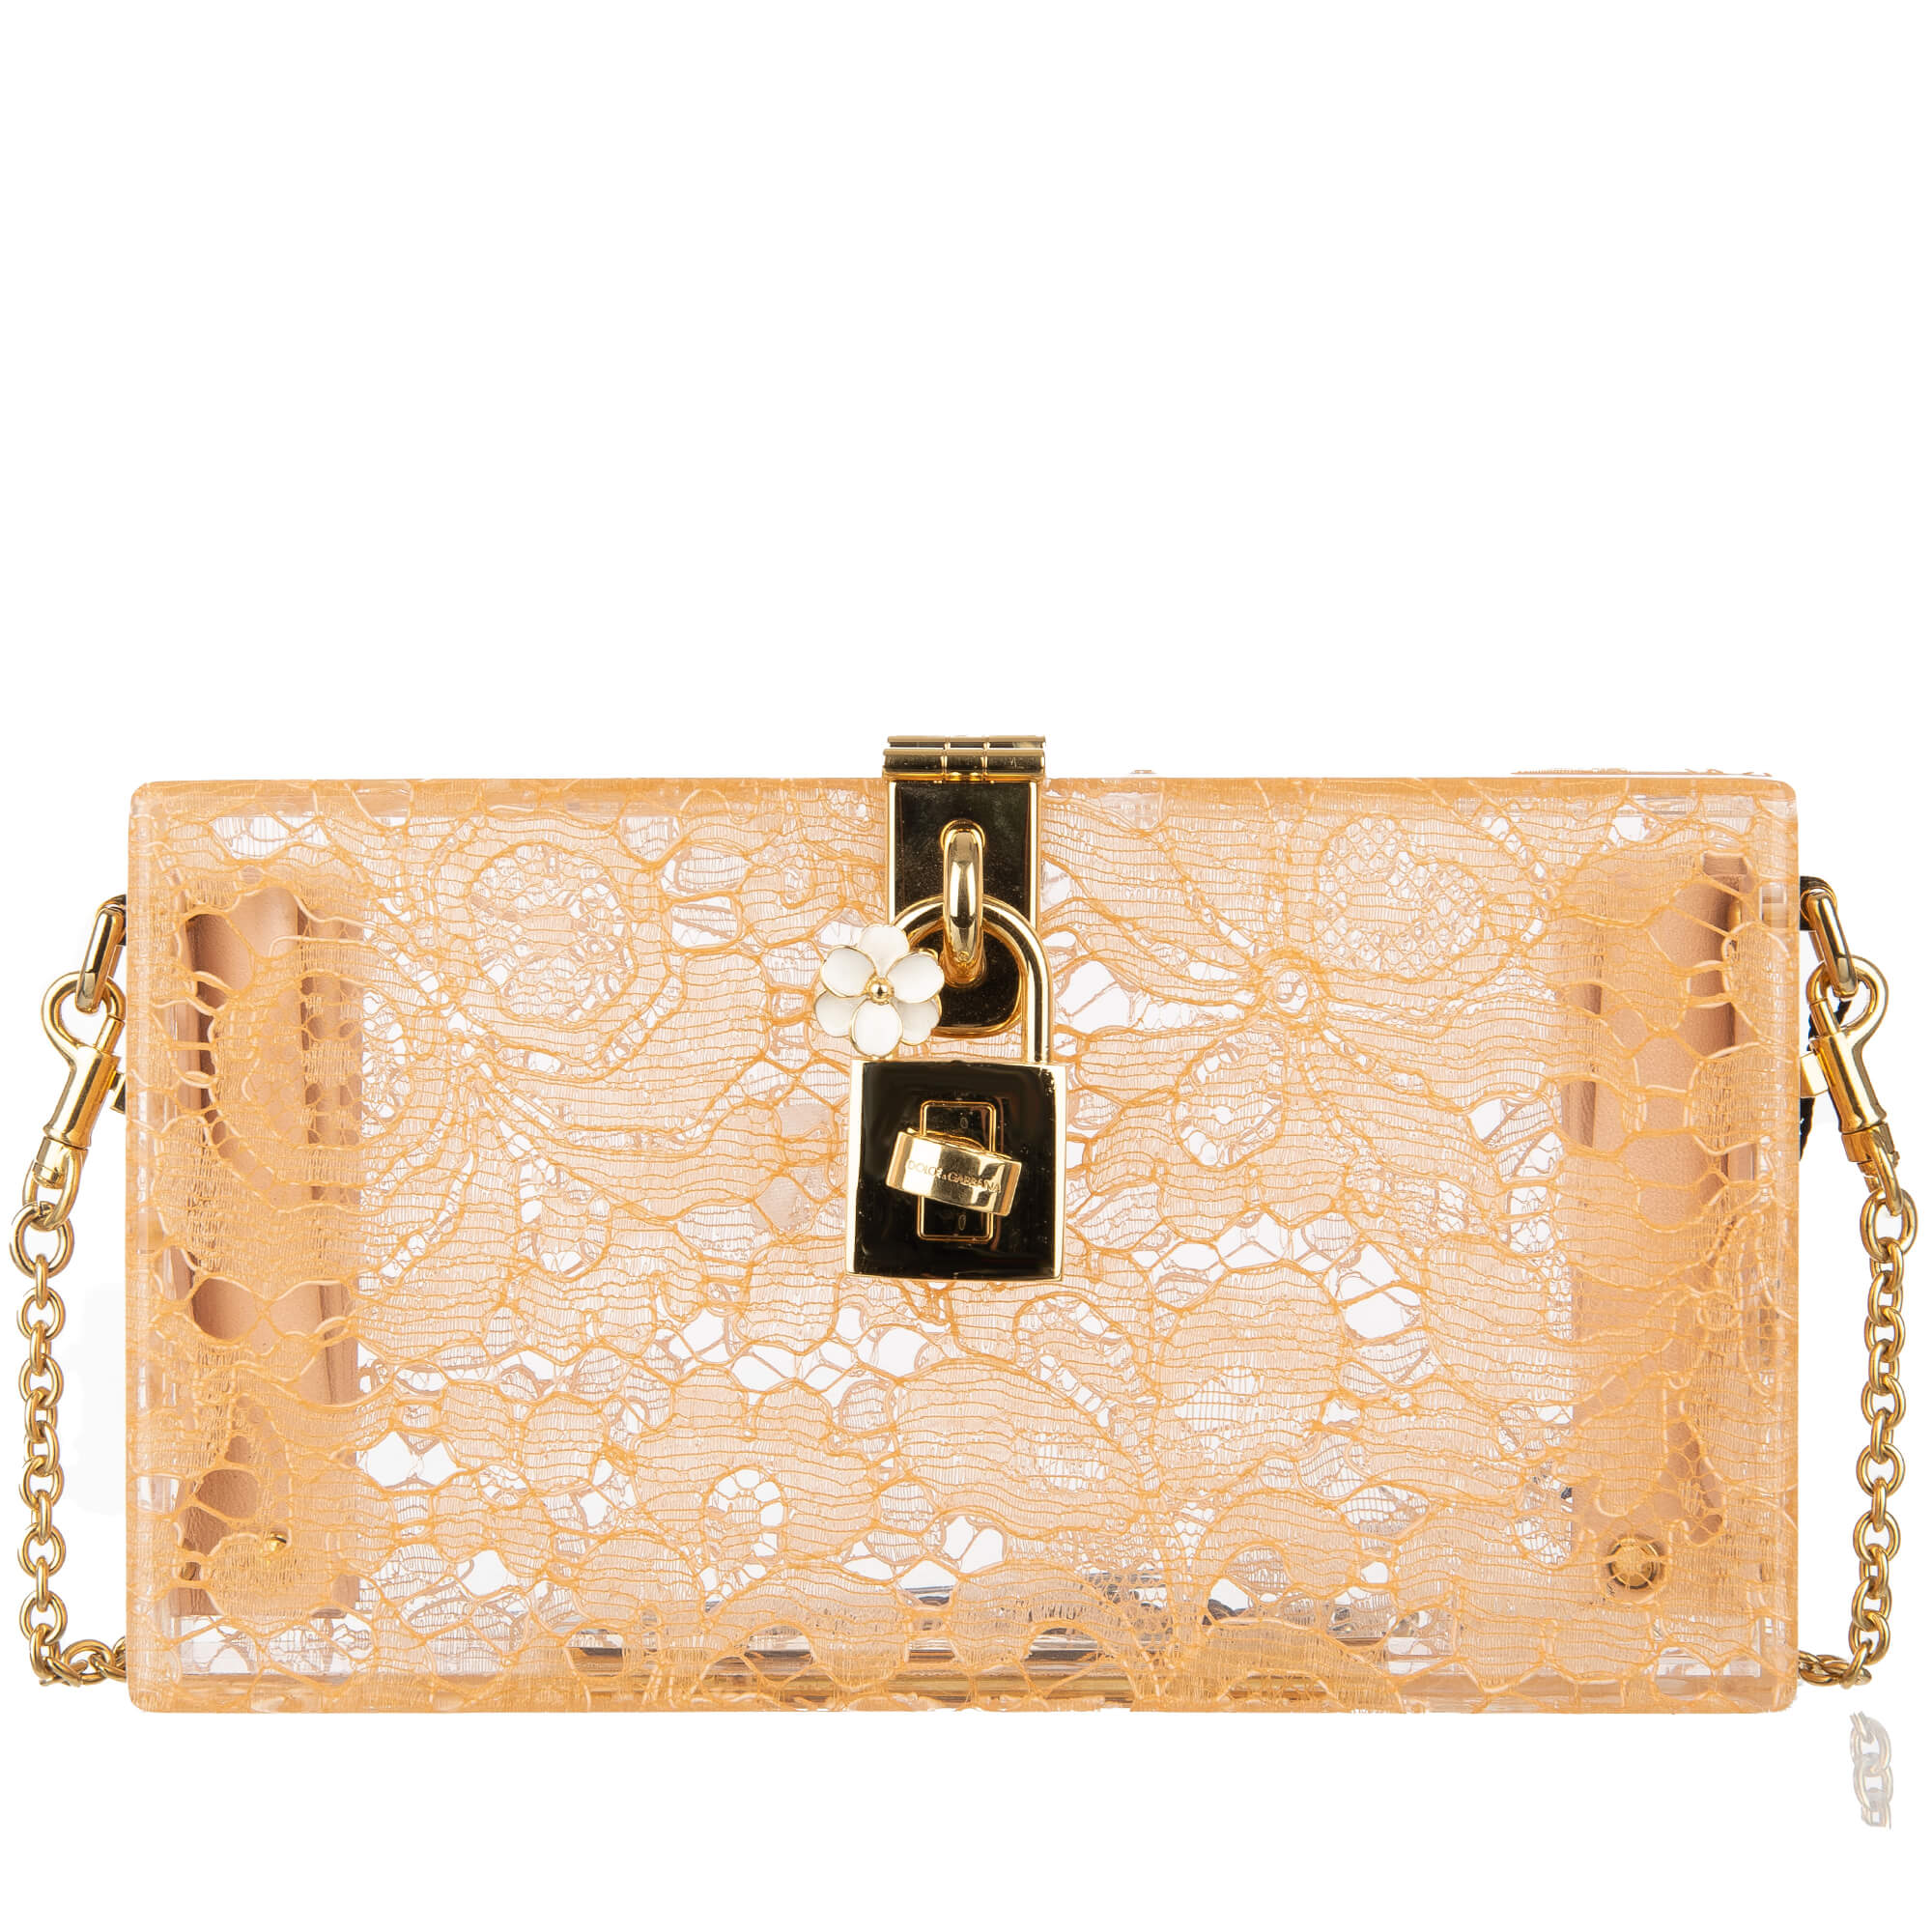 Women's Beige Leather Clutches by Dolce & Gabbana